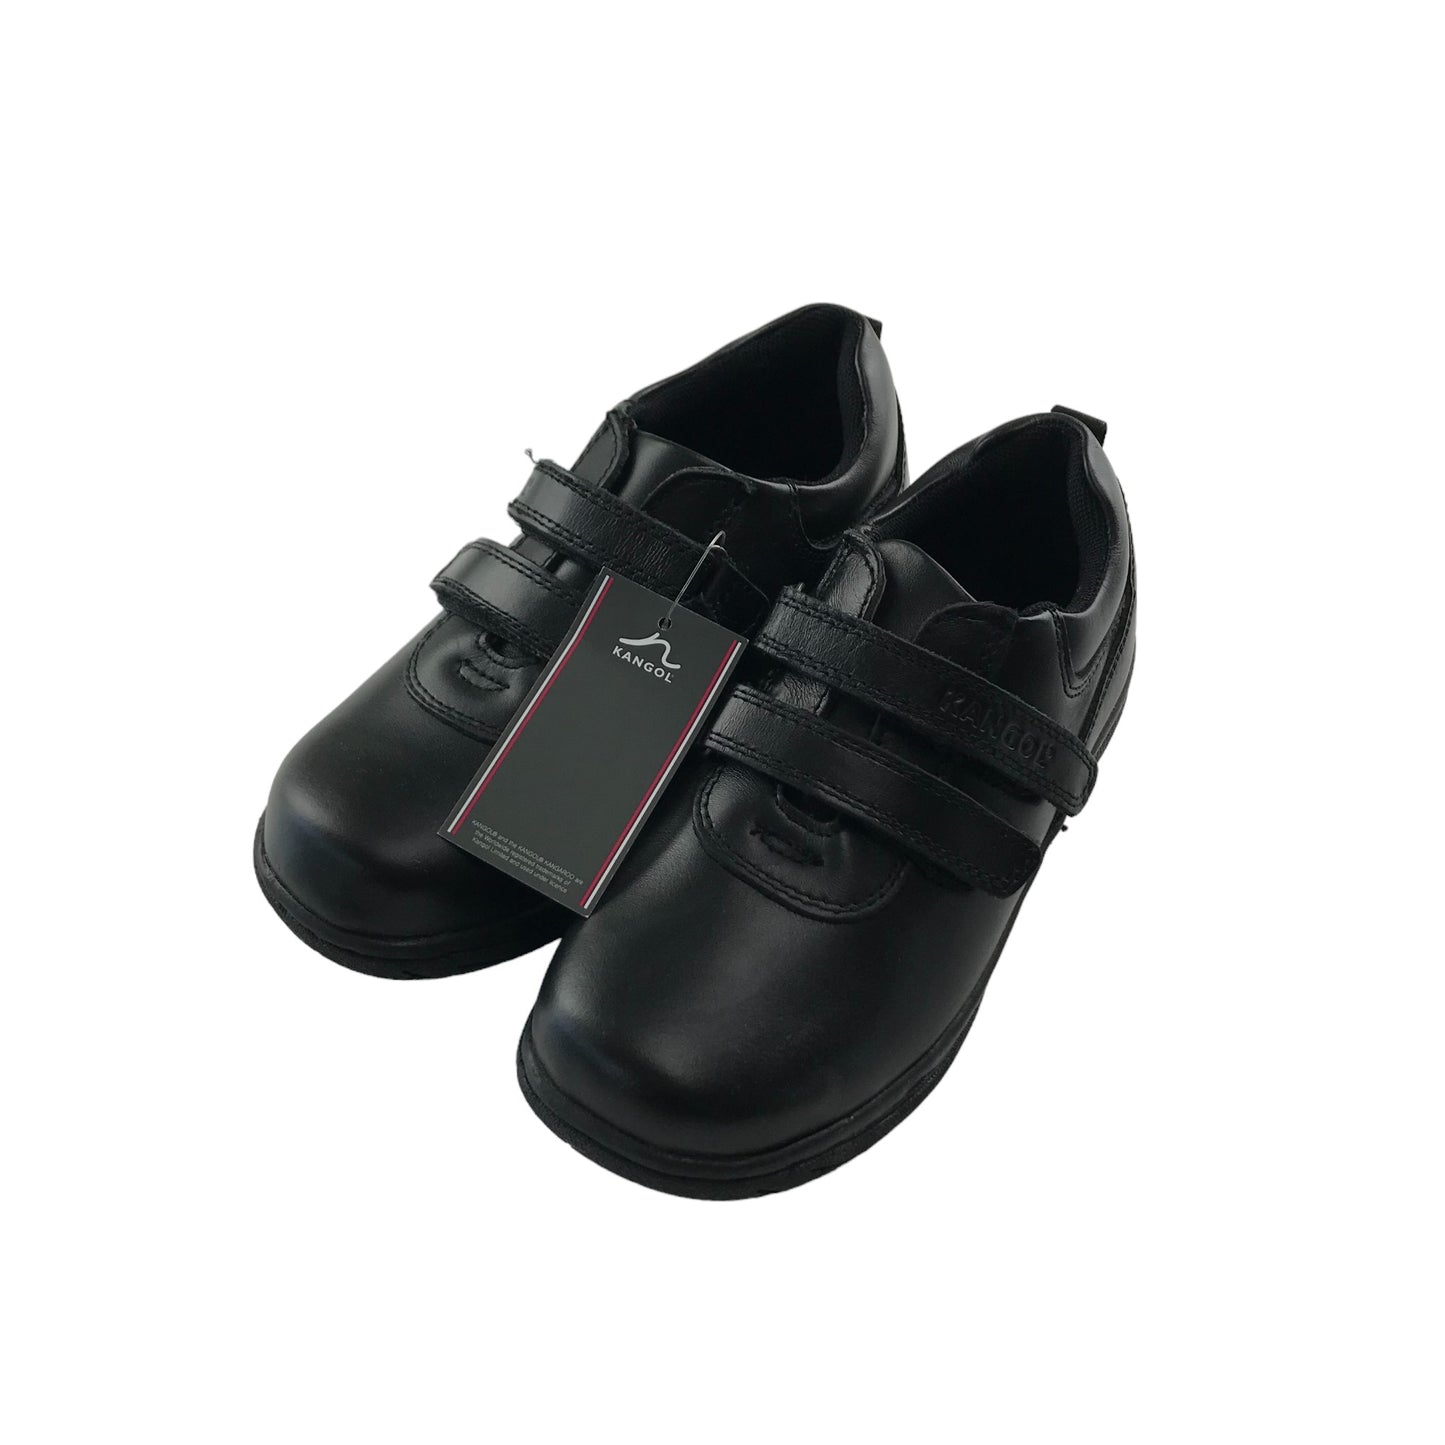 Kangol School Shoes Shoe Size 1 Black Leather with Straps